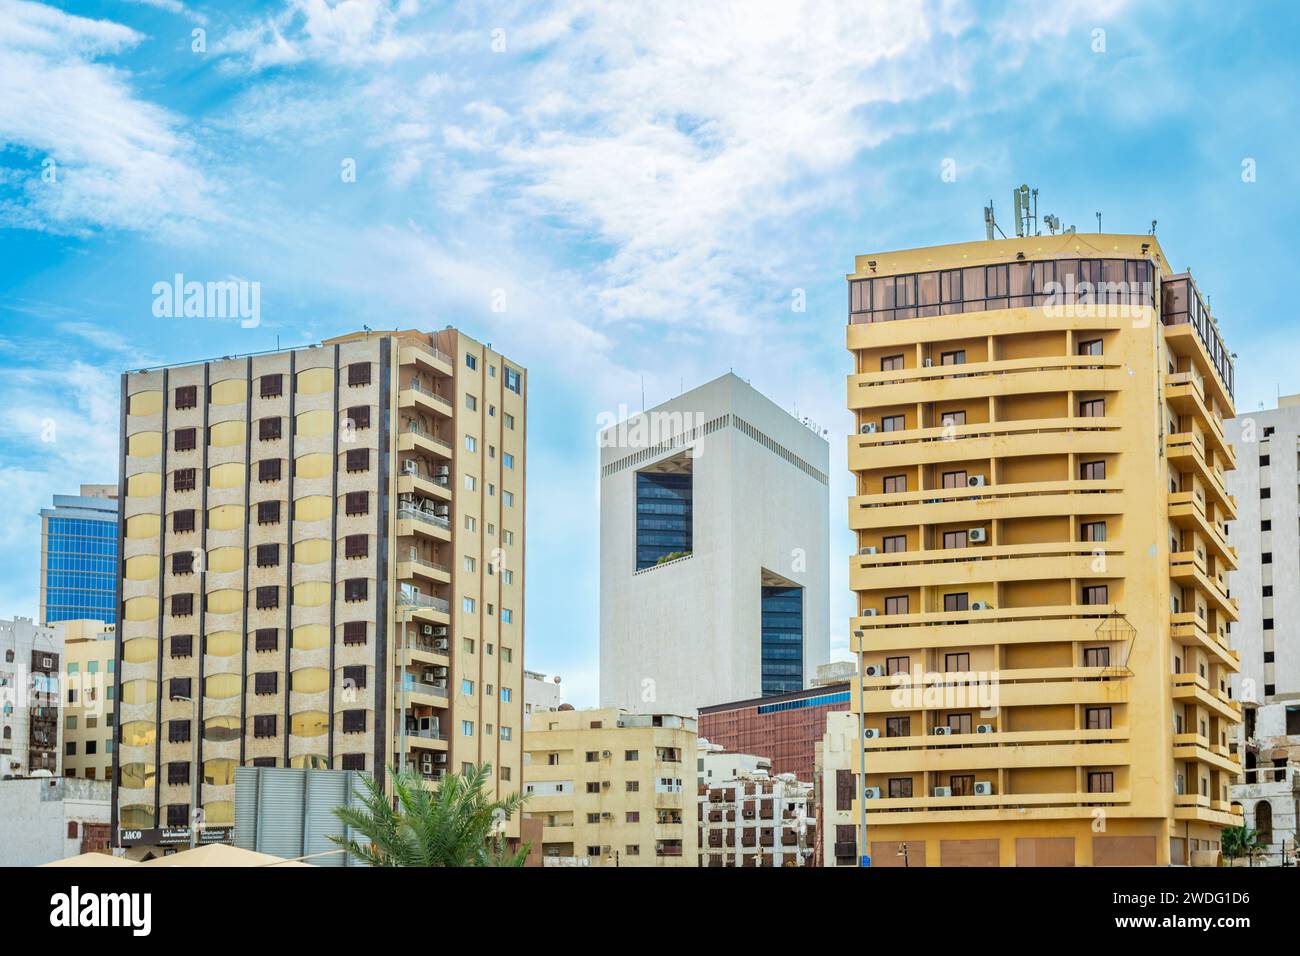 Residential and business buildings of Al-Balad, downtown central district of Jeddah, Saudi Arabia Stock Photo